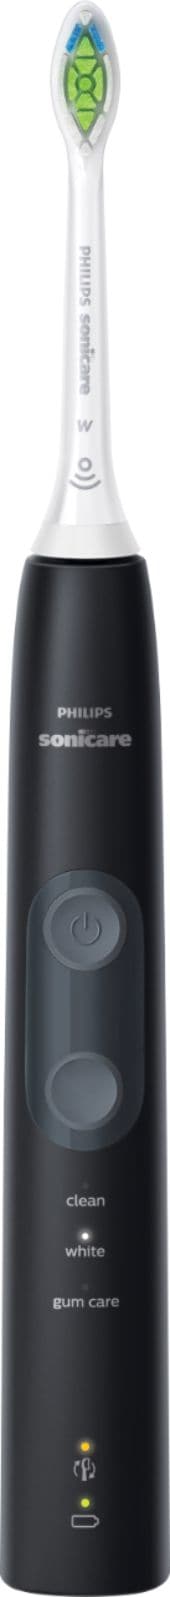 Philips Sonicare - ProtectiveClean 5100 Rechargeable Toothbrush - Black_0